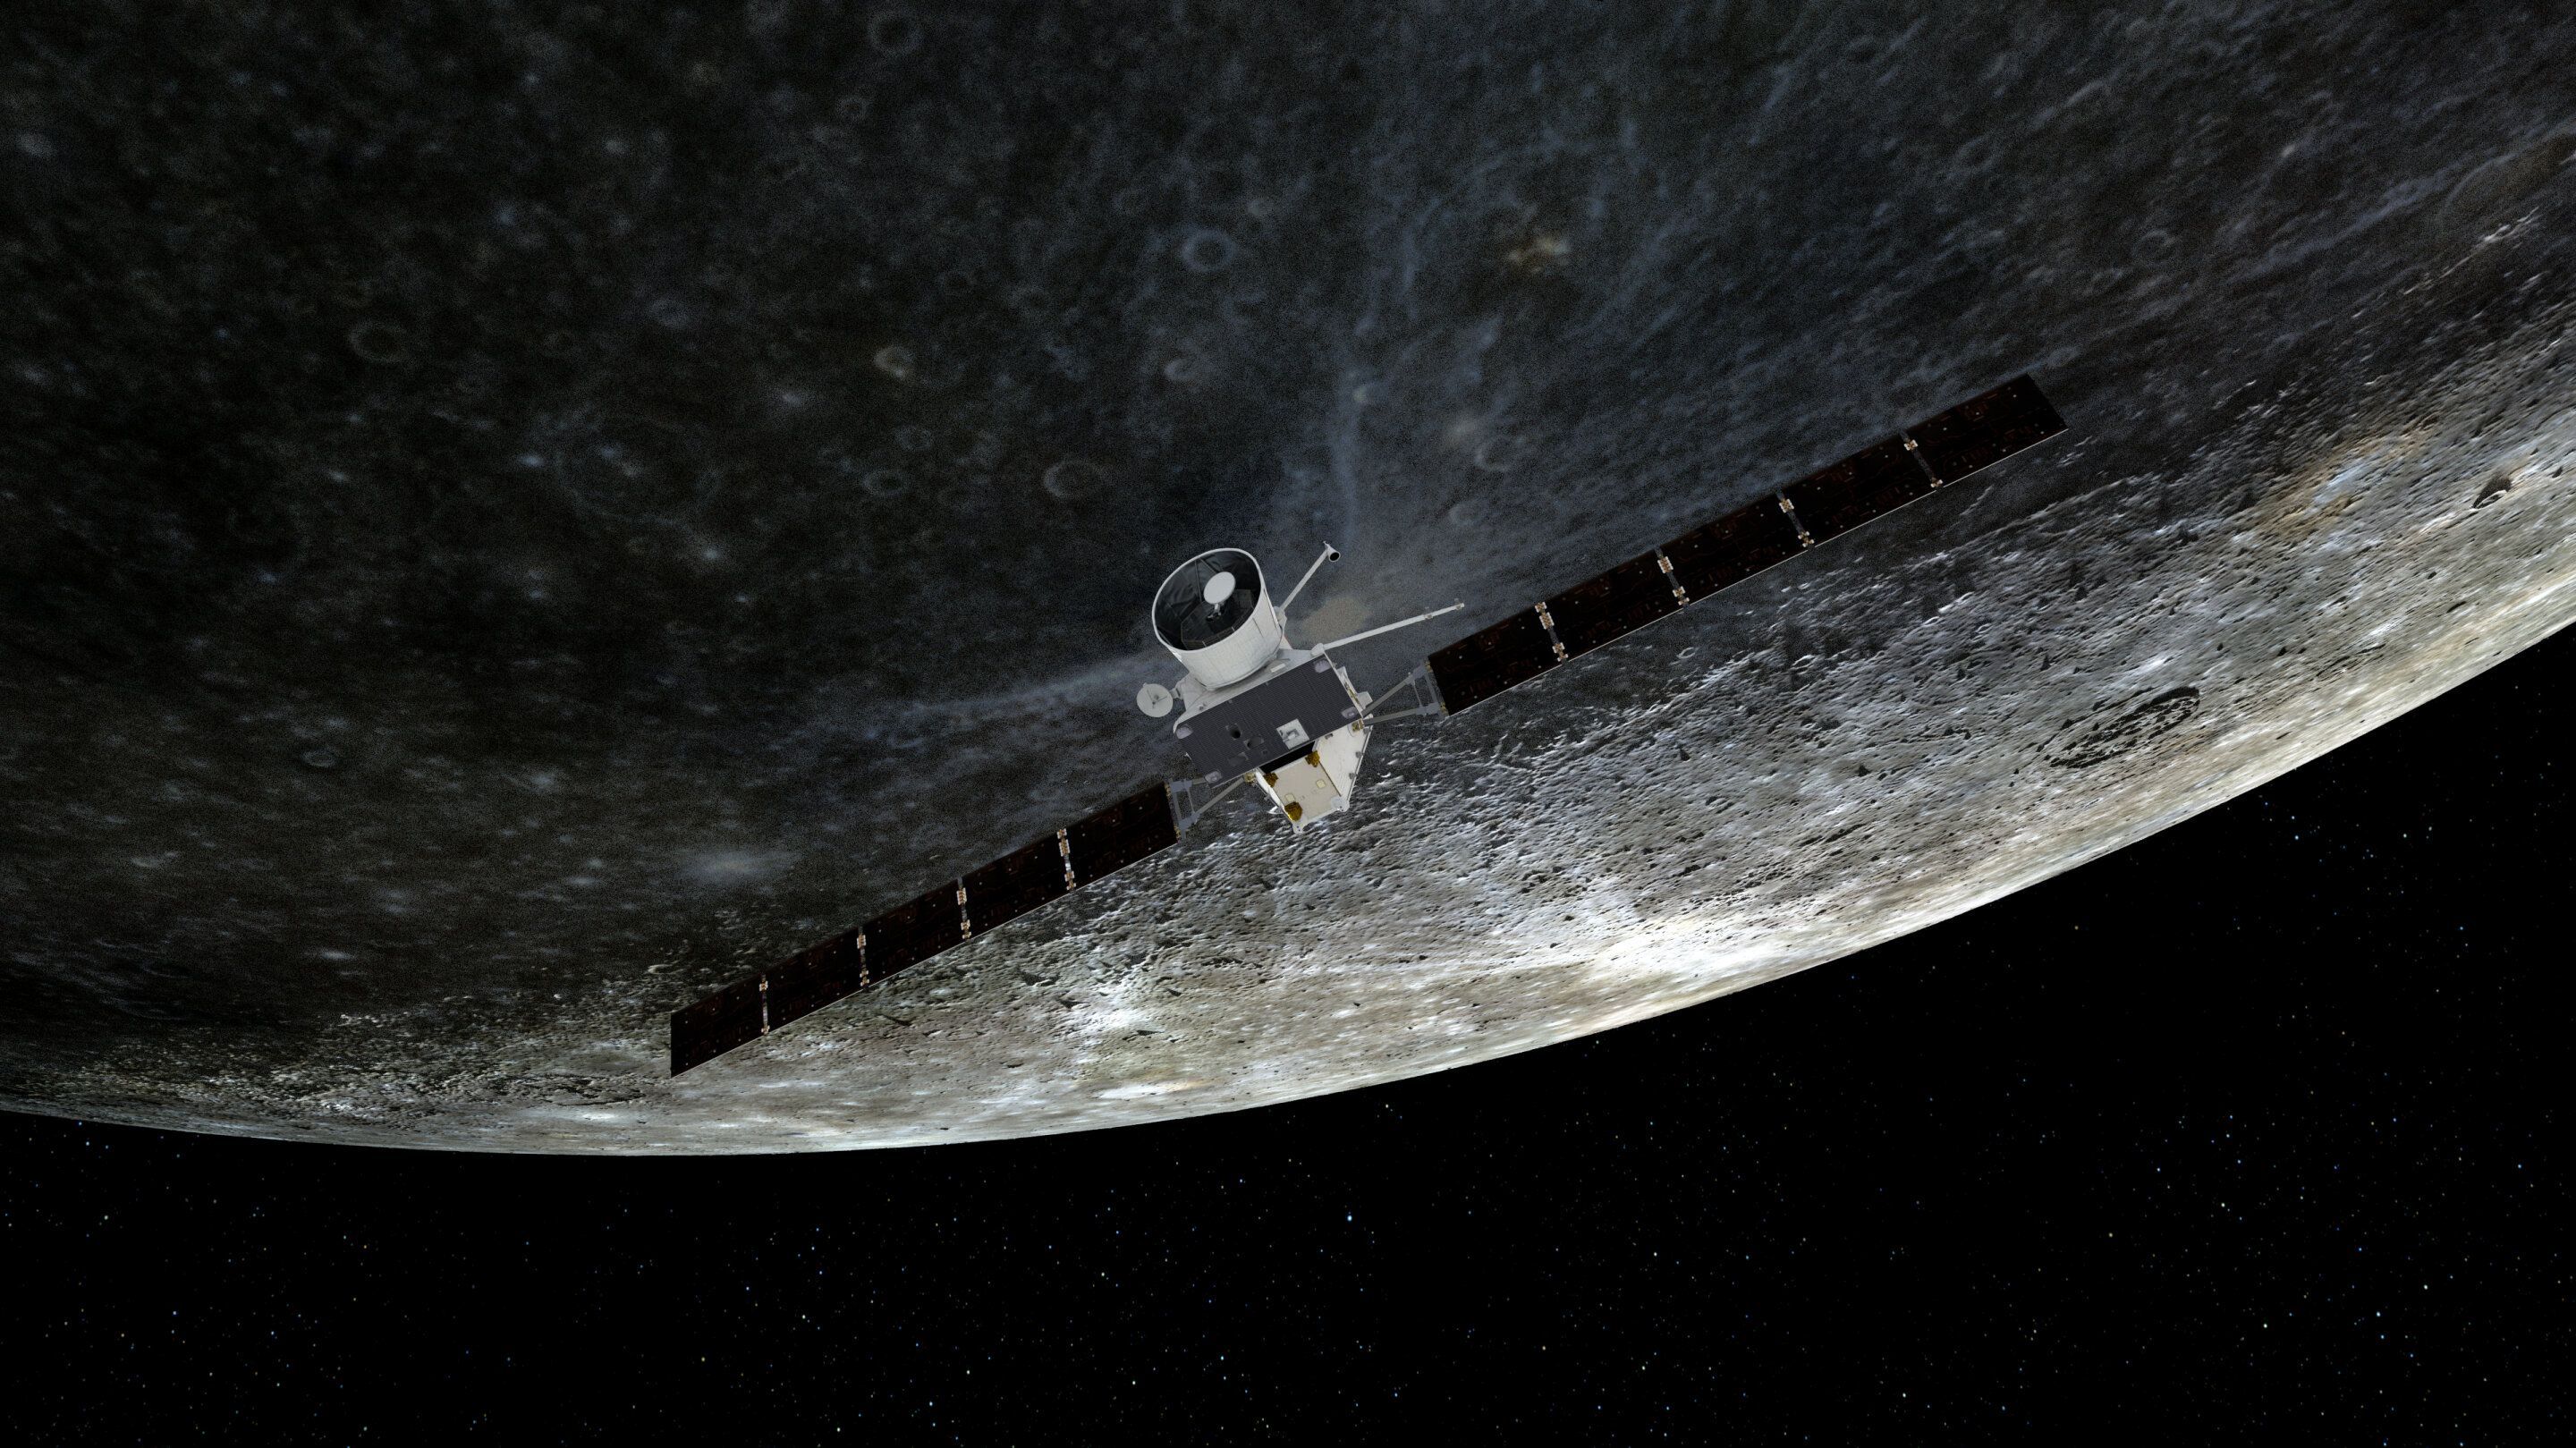 Third Mercury flyby on the horizon for BepiColombo mission